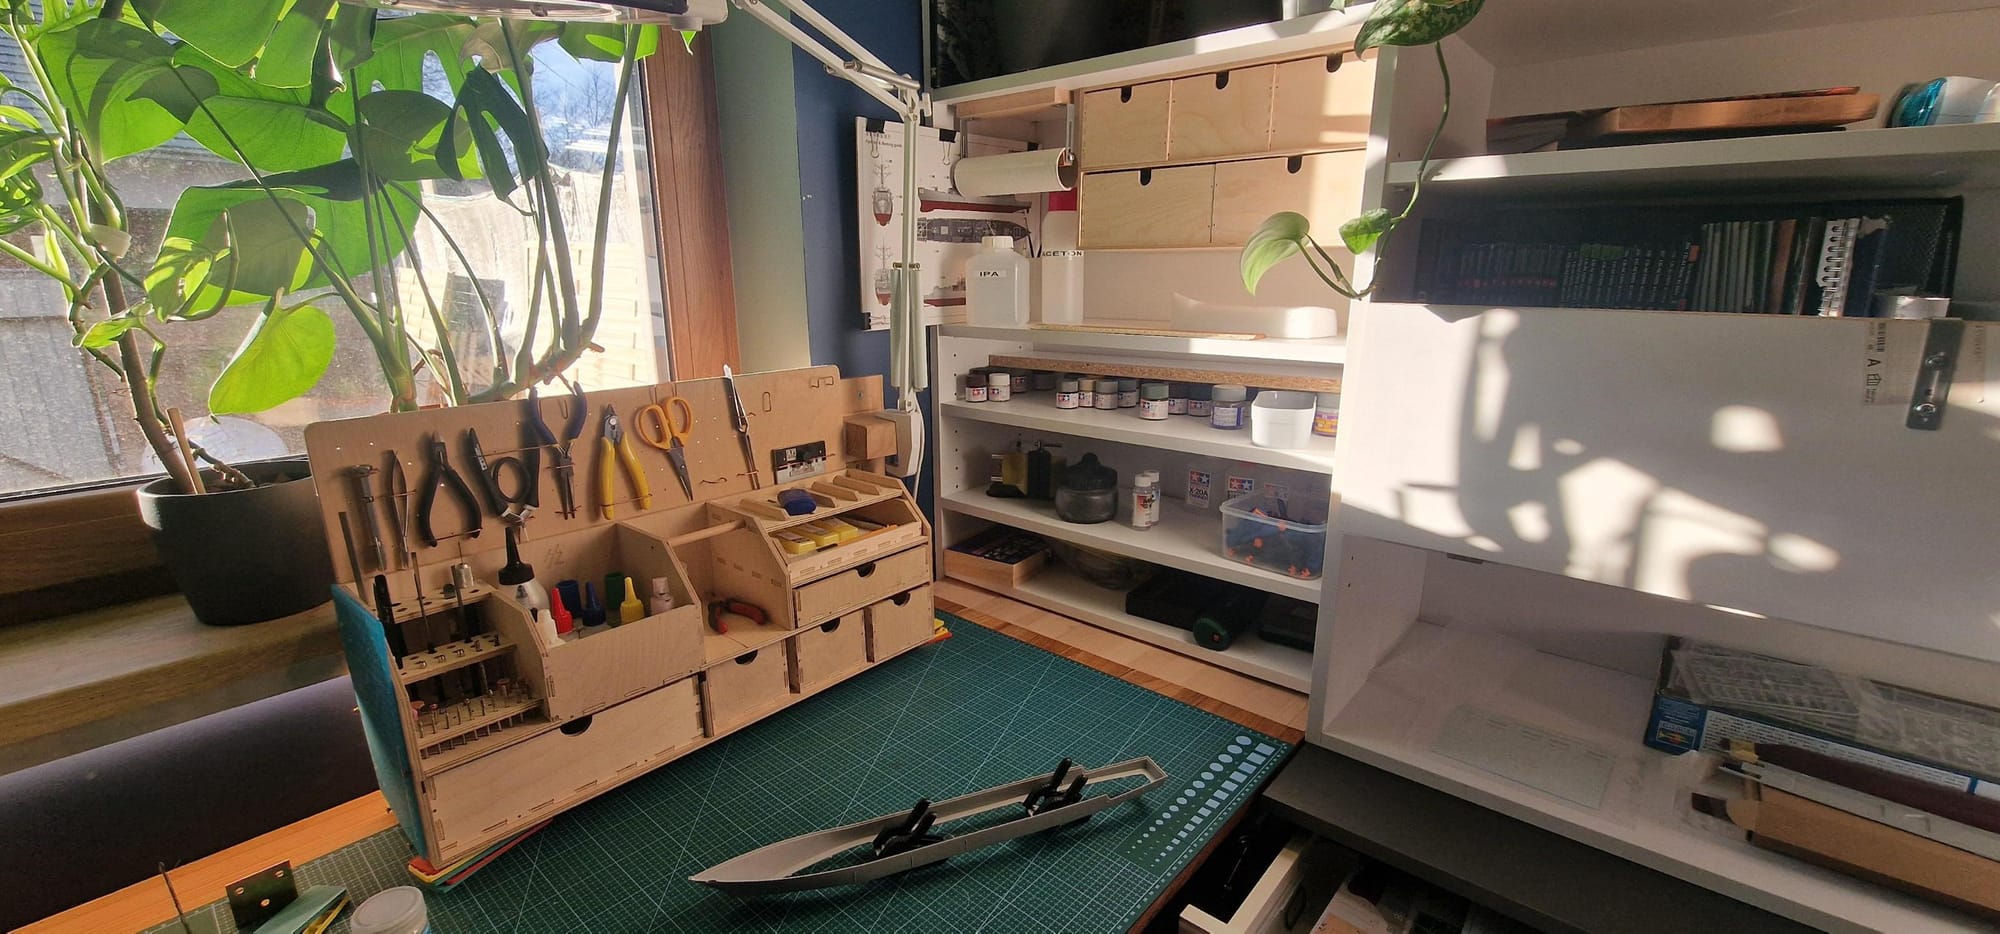 A detailed and organised crafting area illuminated by natural sunlight, featuring a well-equipped tool organiser and shelving stocked with various art supplies